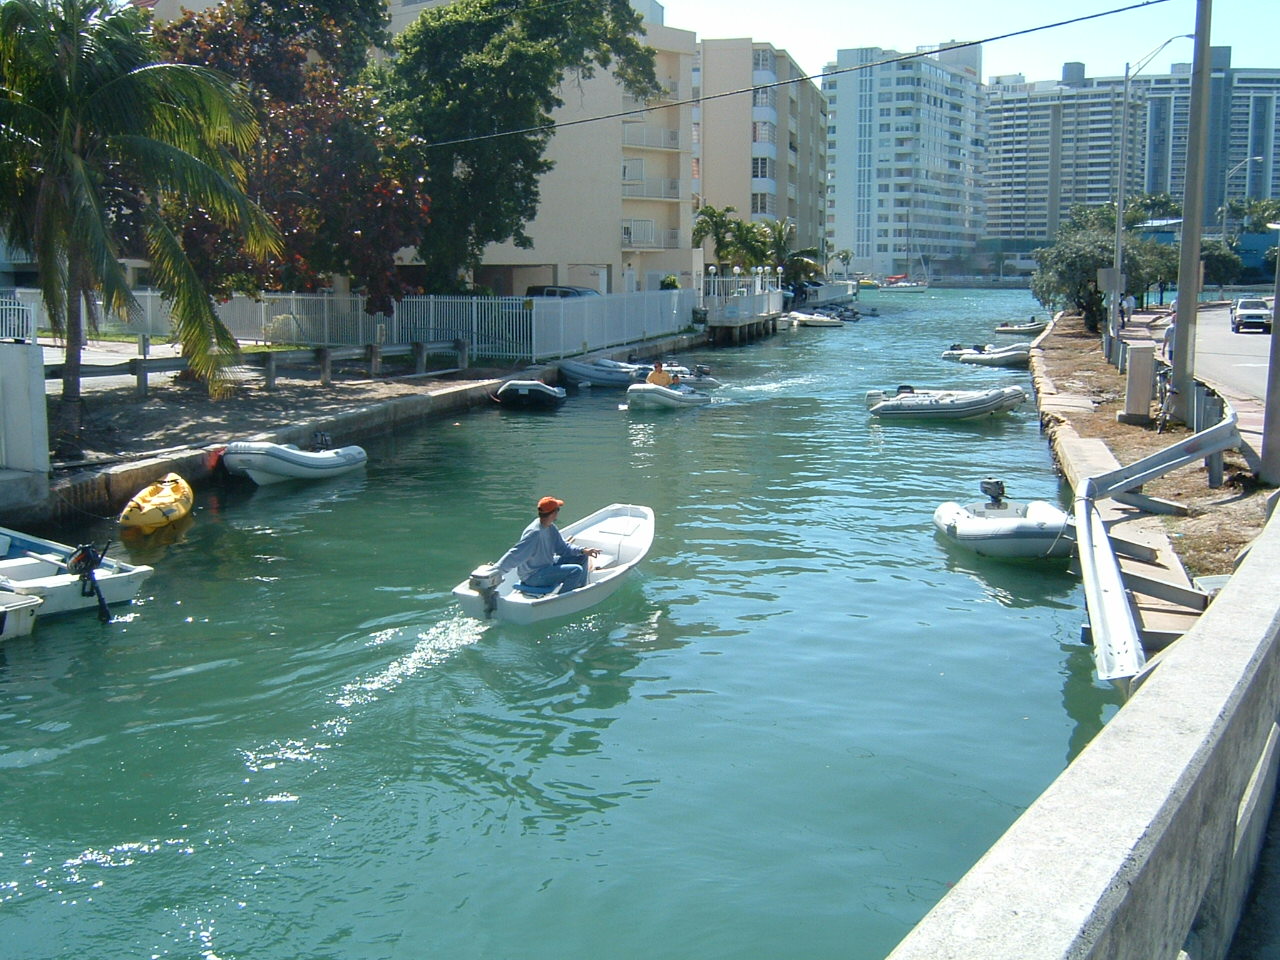 The Parking Lot, Collins Canal, South Beach